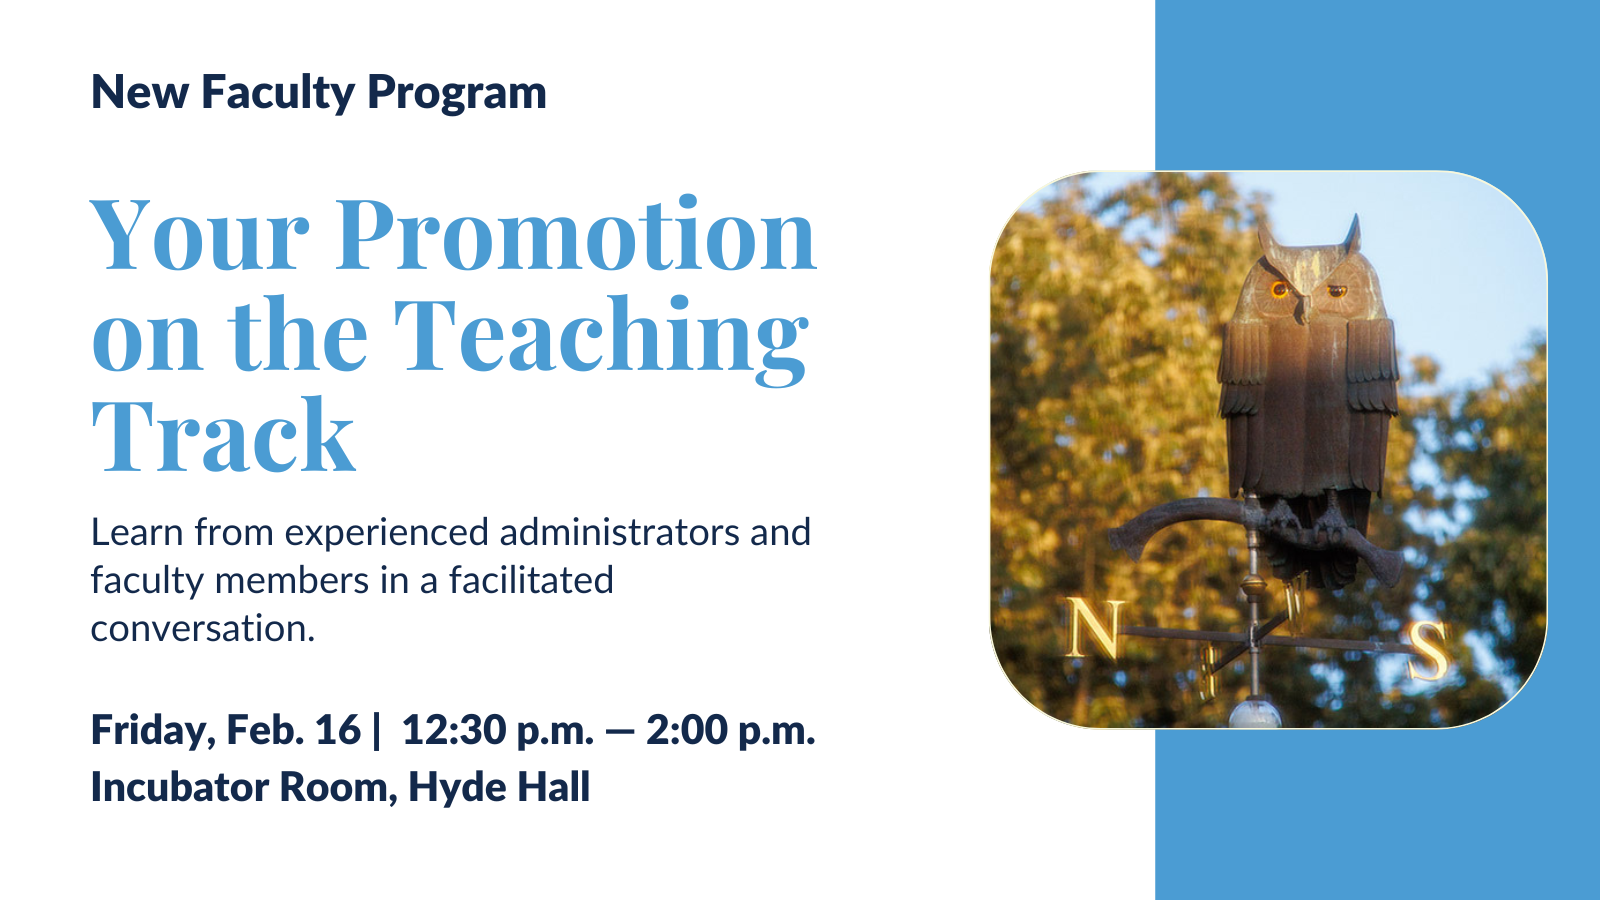 New Faculty Program. Your Promotion on the Teaching Track. Friday, Feb. 16 12:30 p.m. Incubator Room, Hyde Hall.